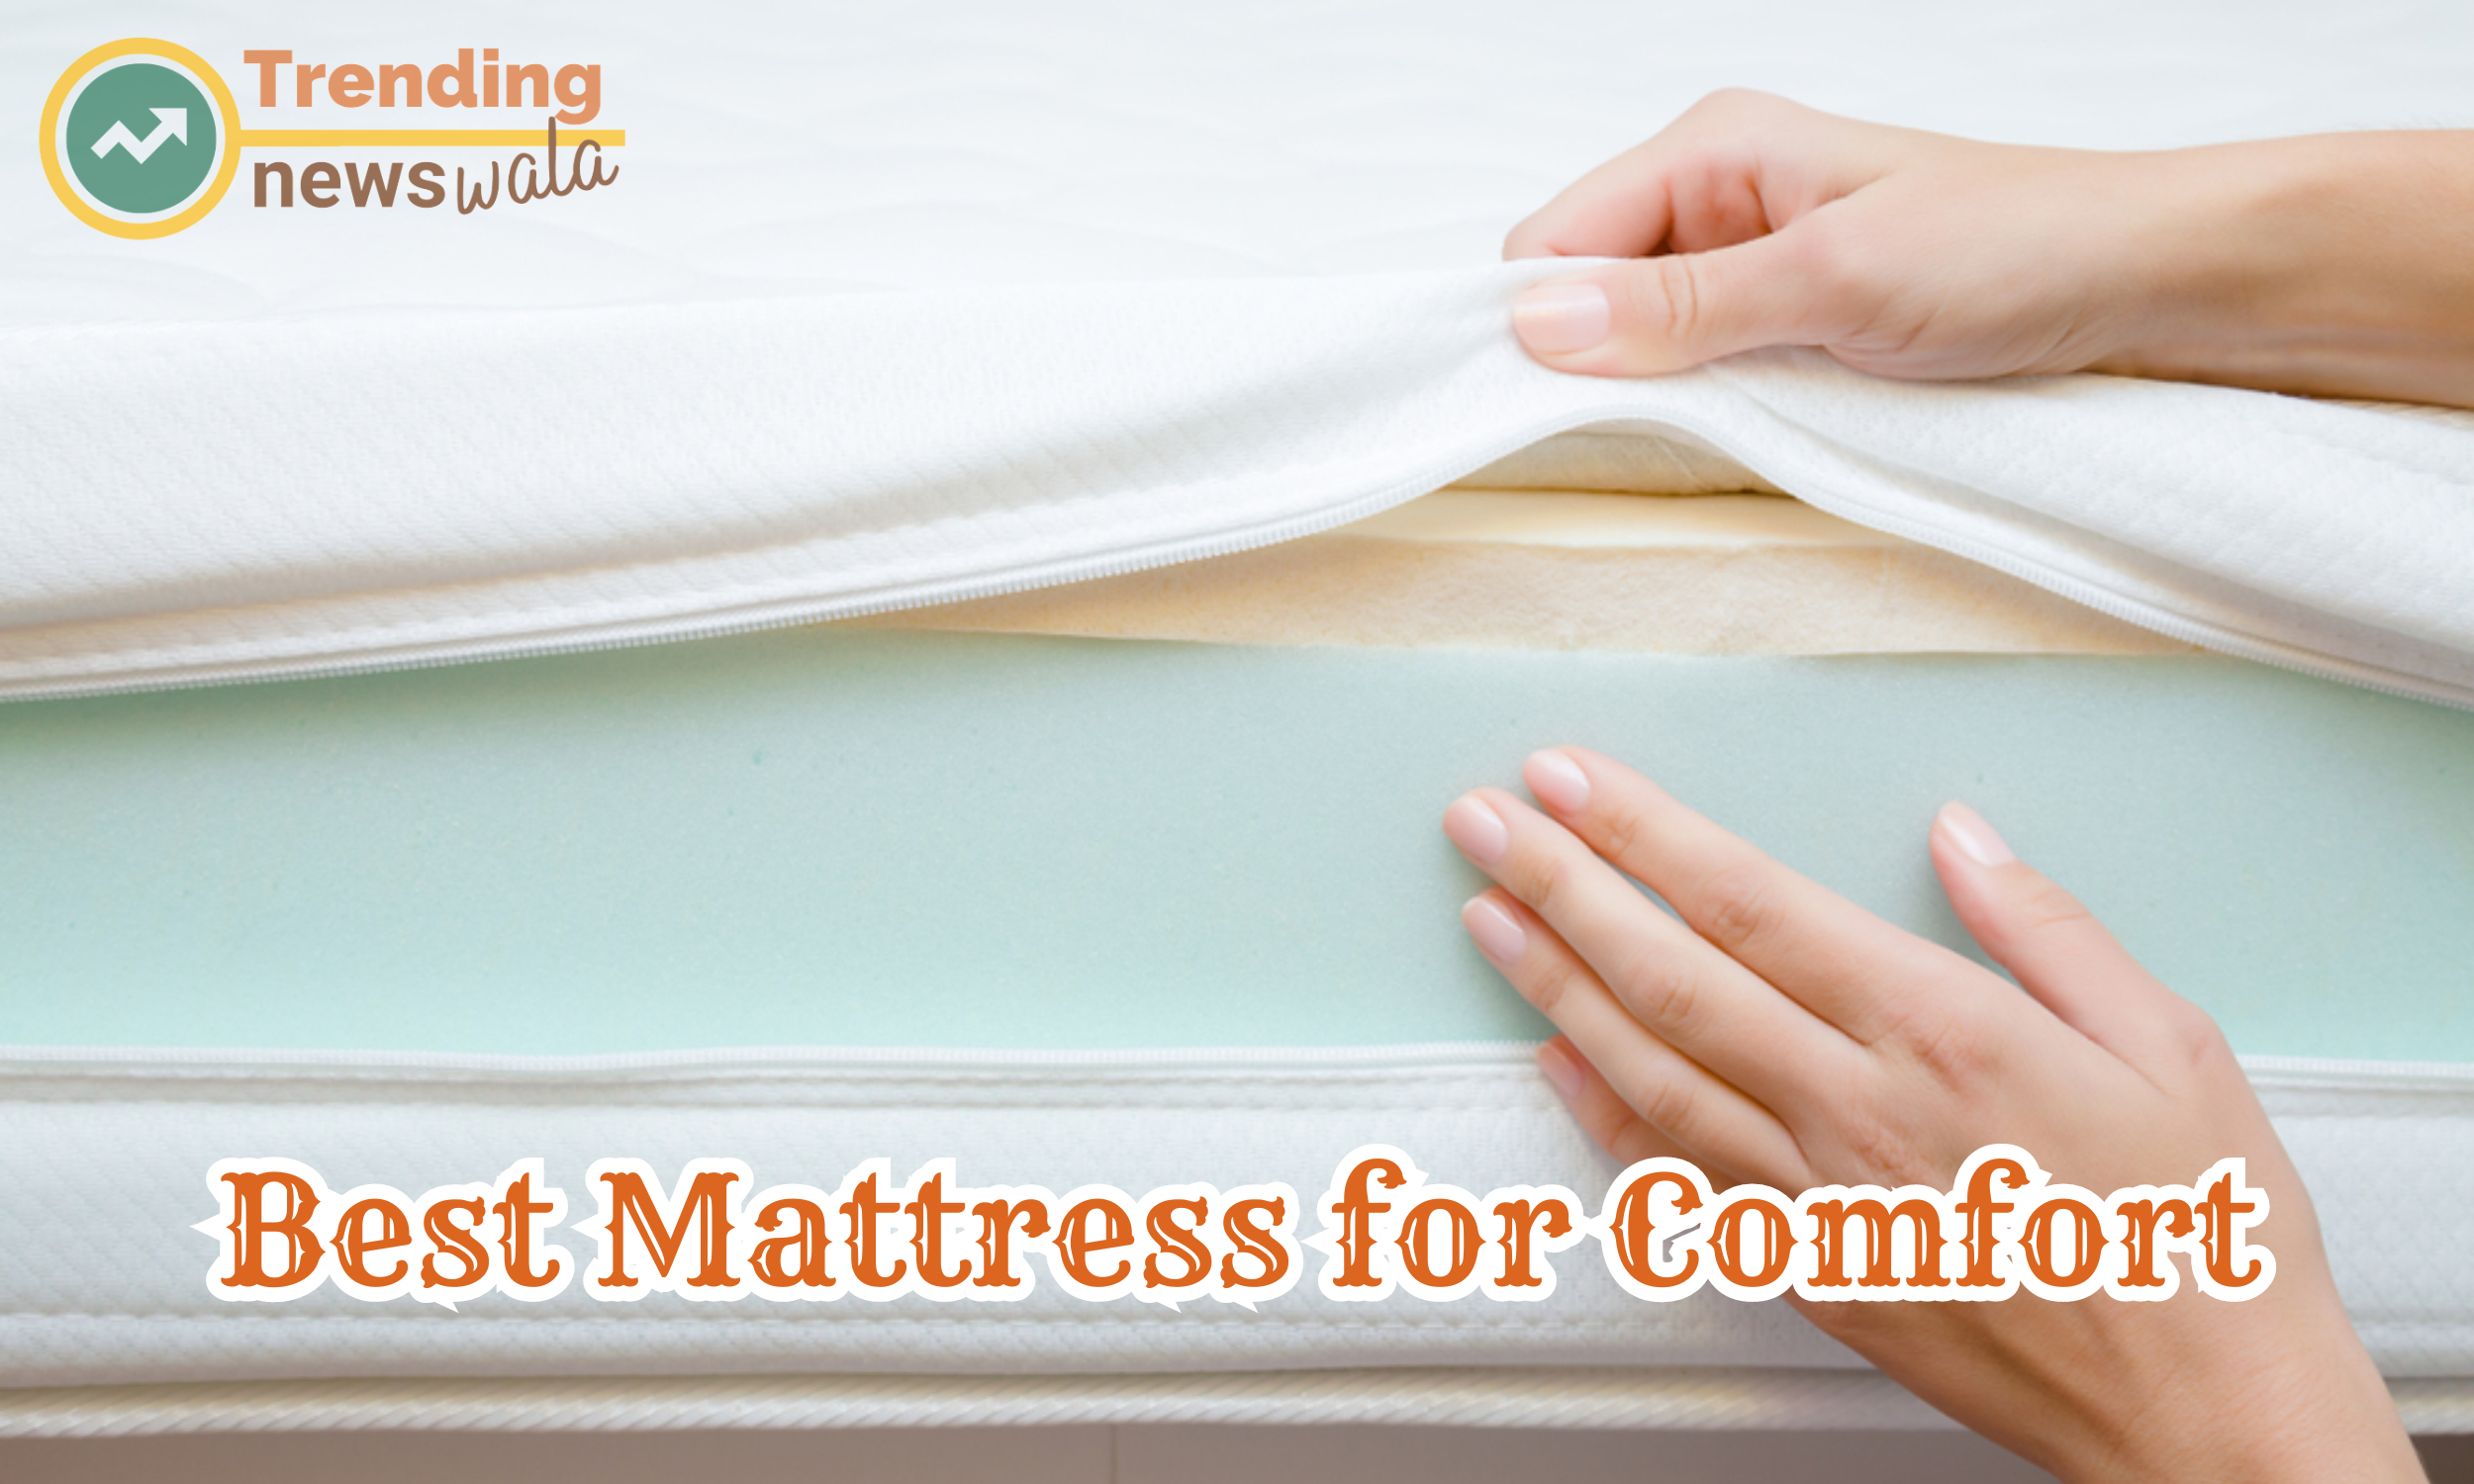 When searching for the best mattress for comfort